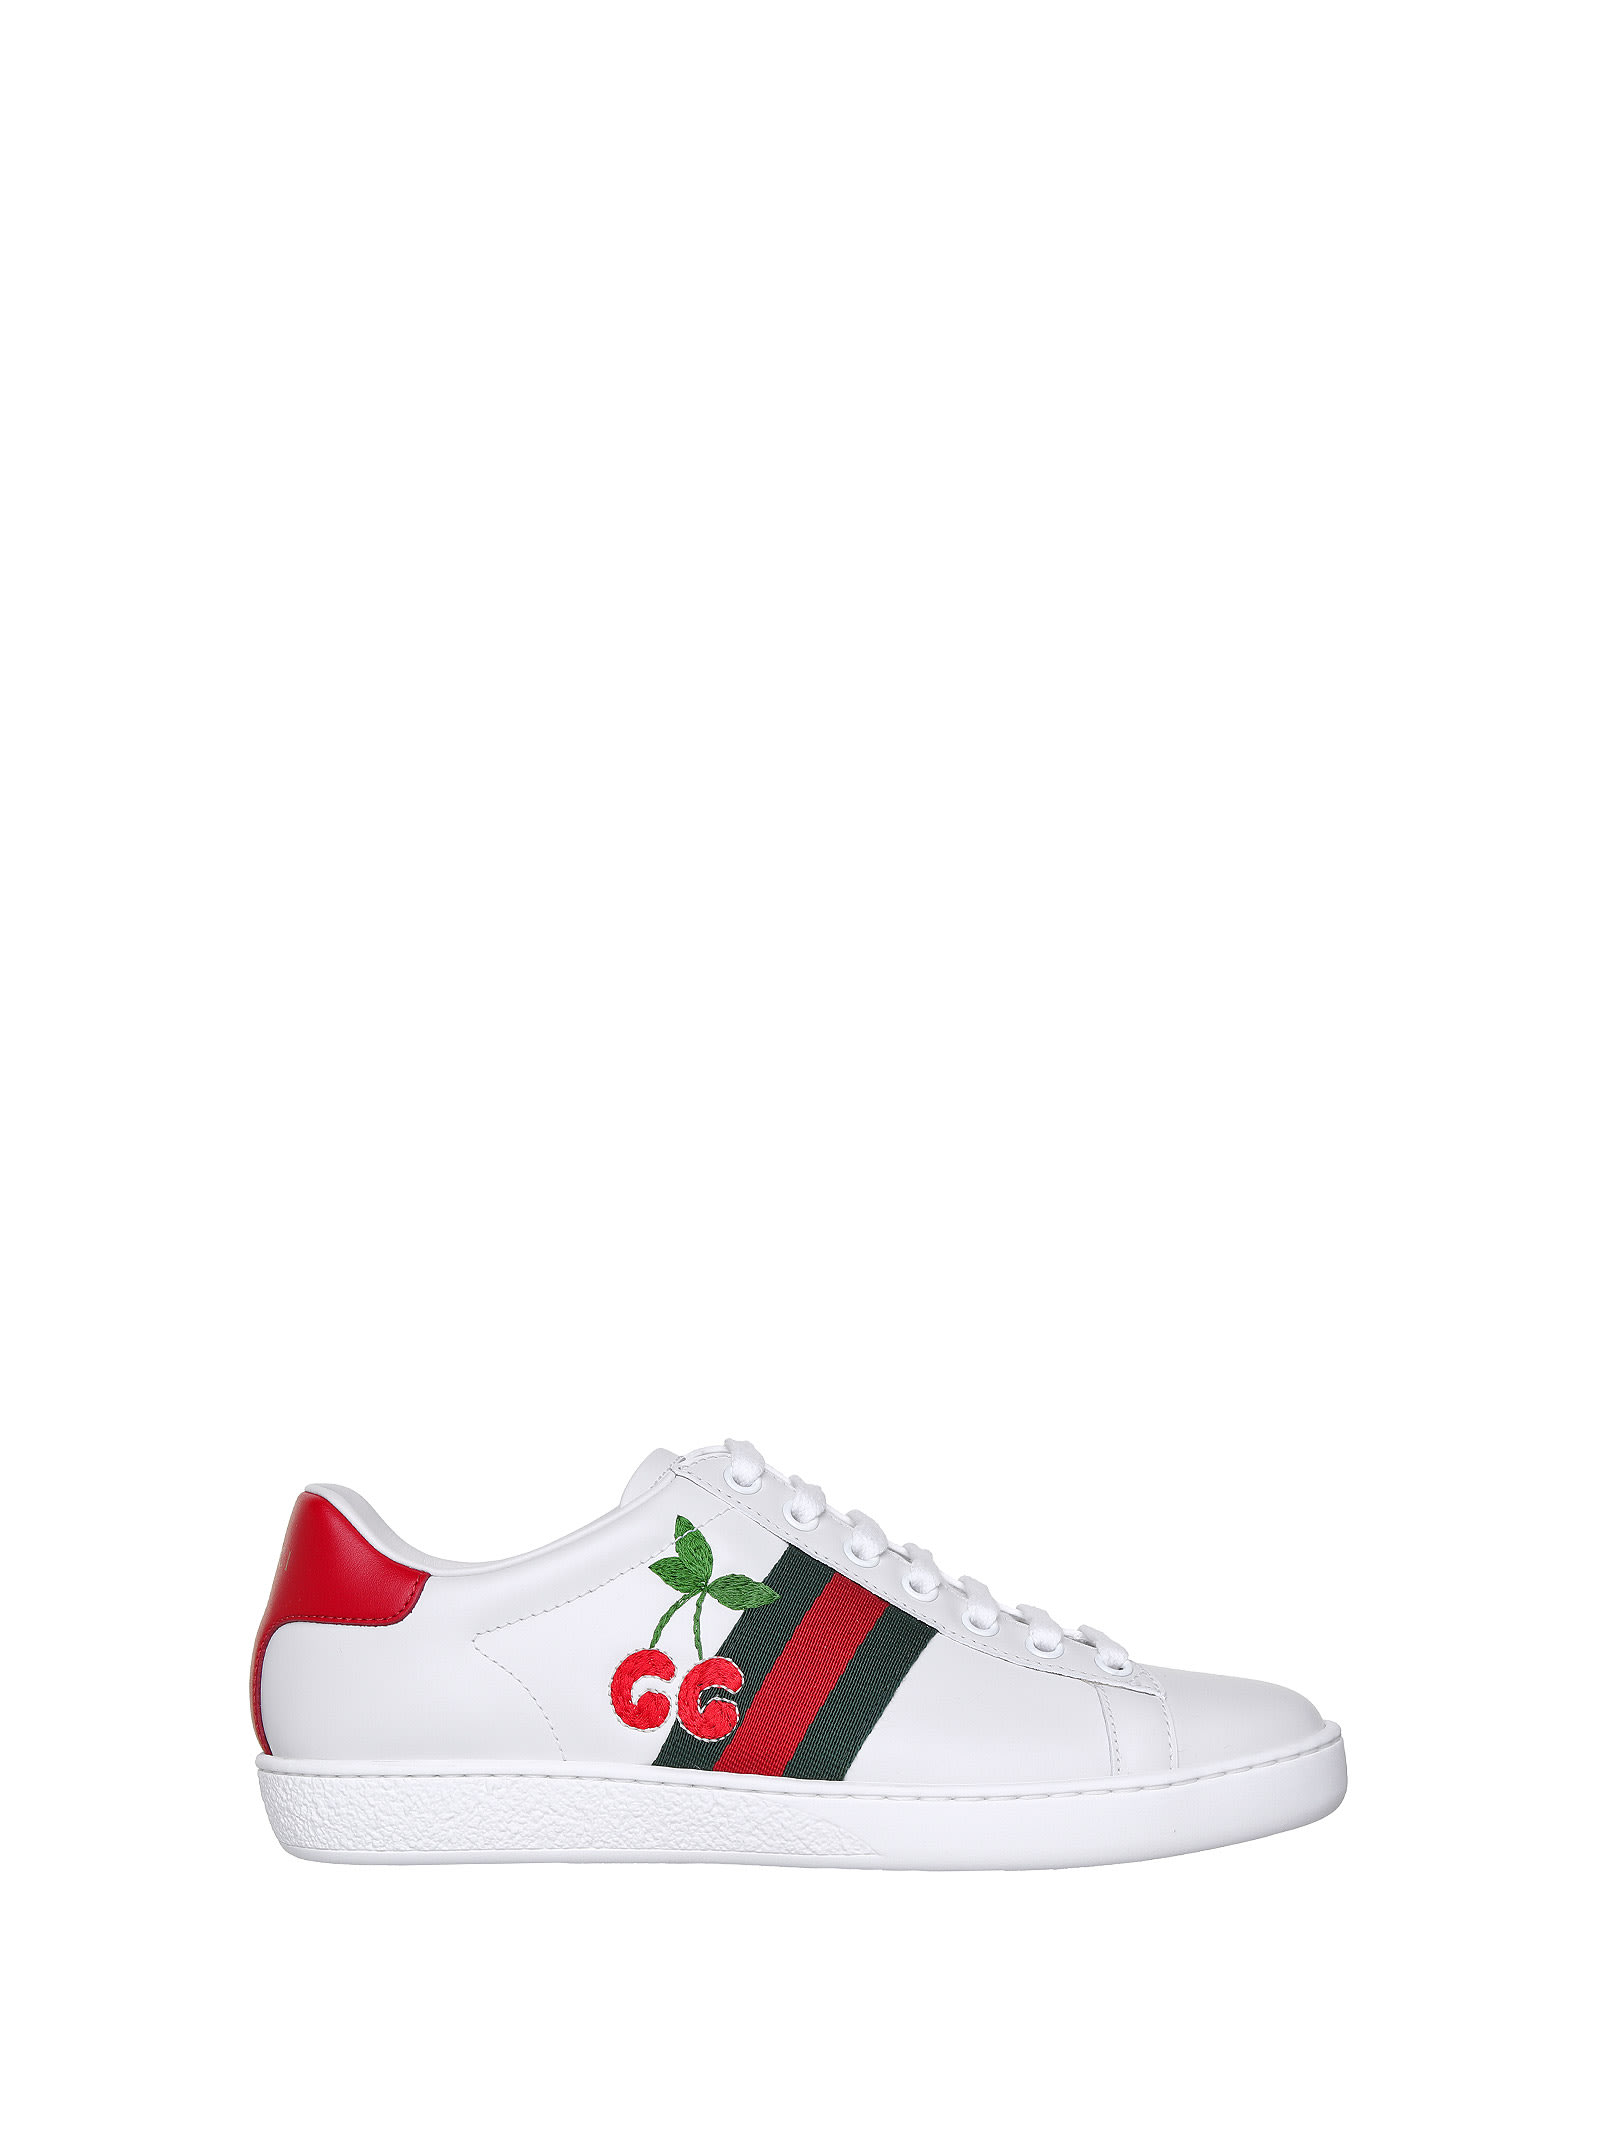 Gucci Ace With Cherries